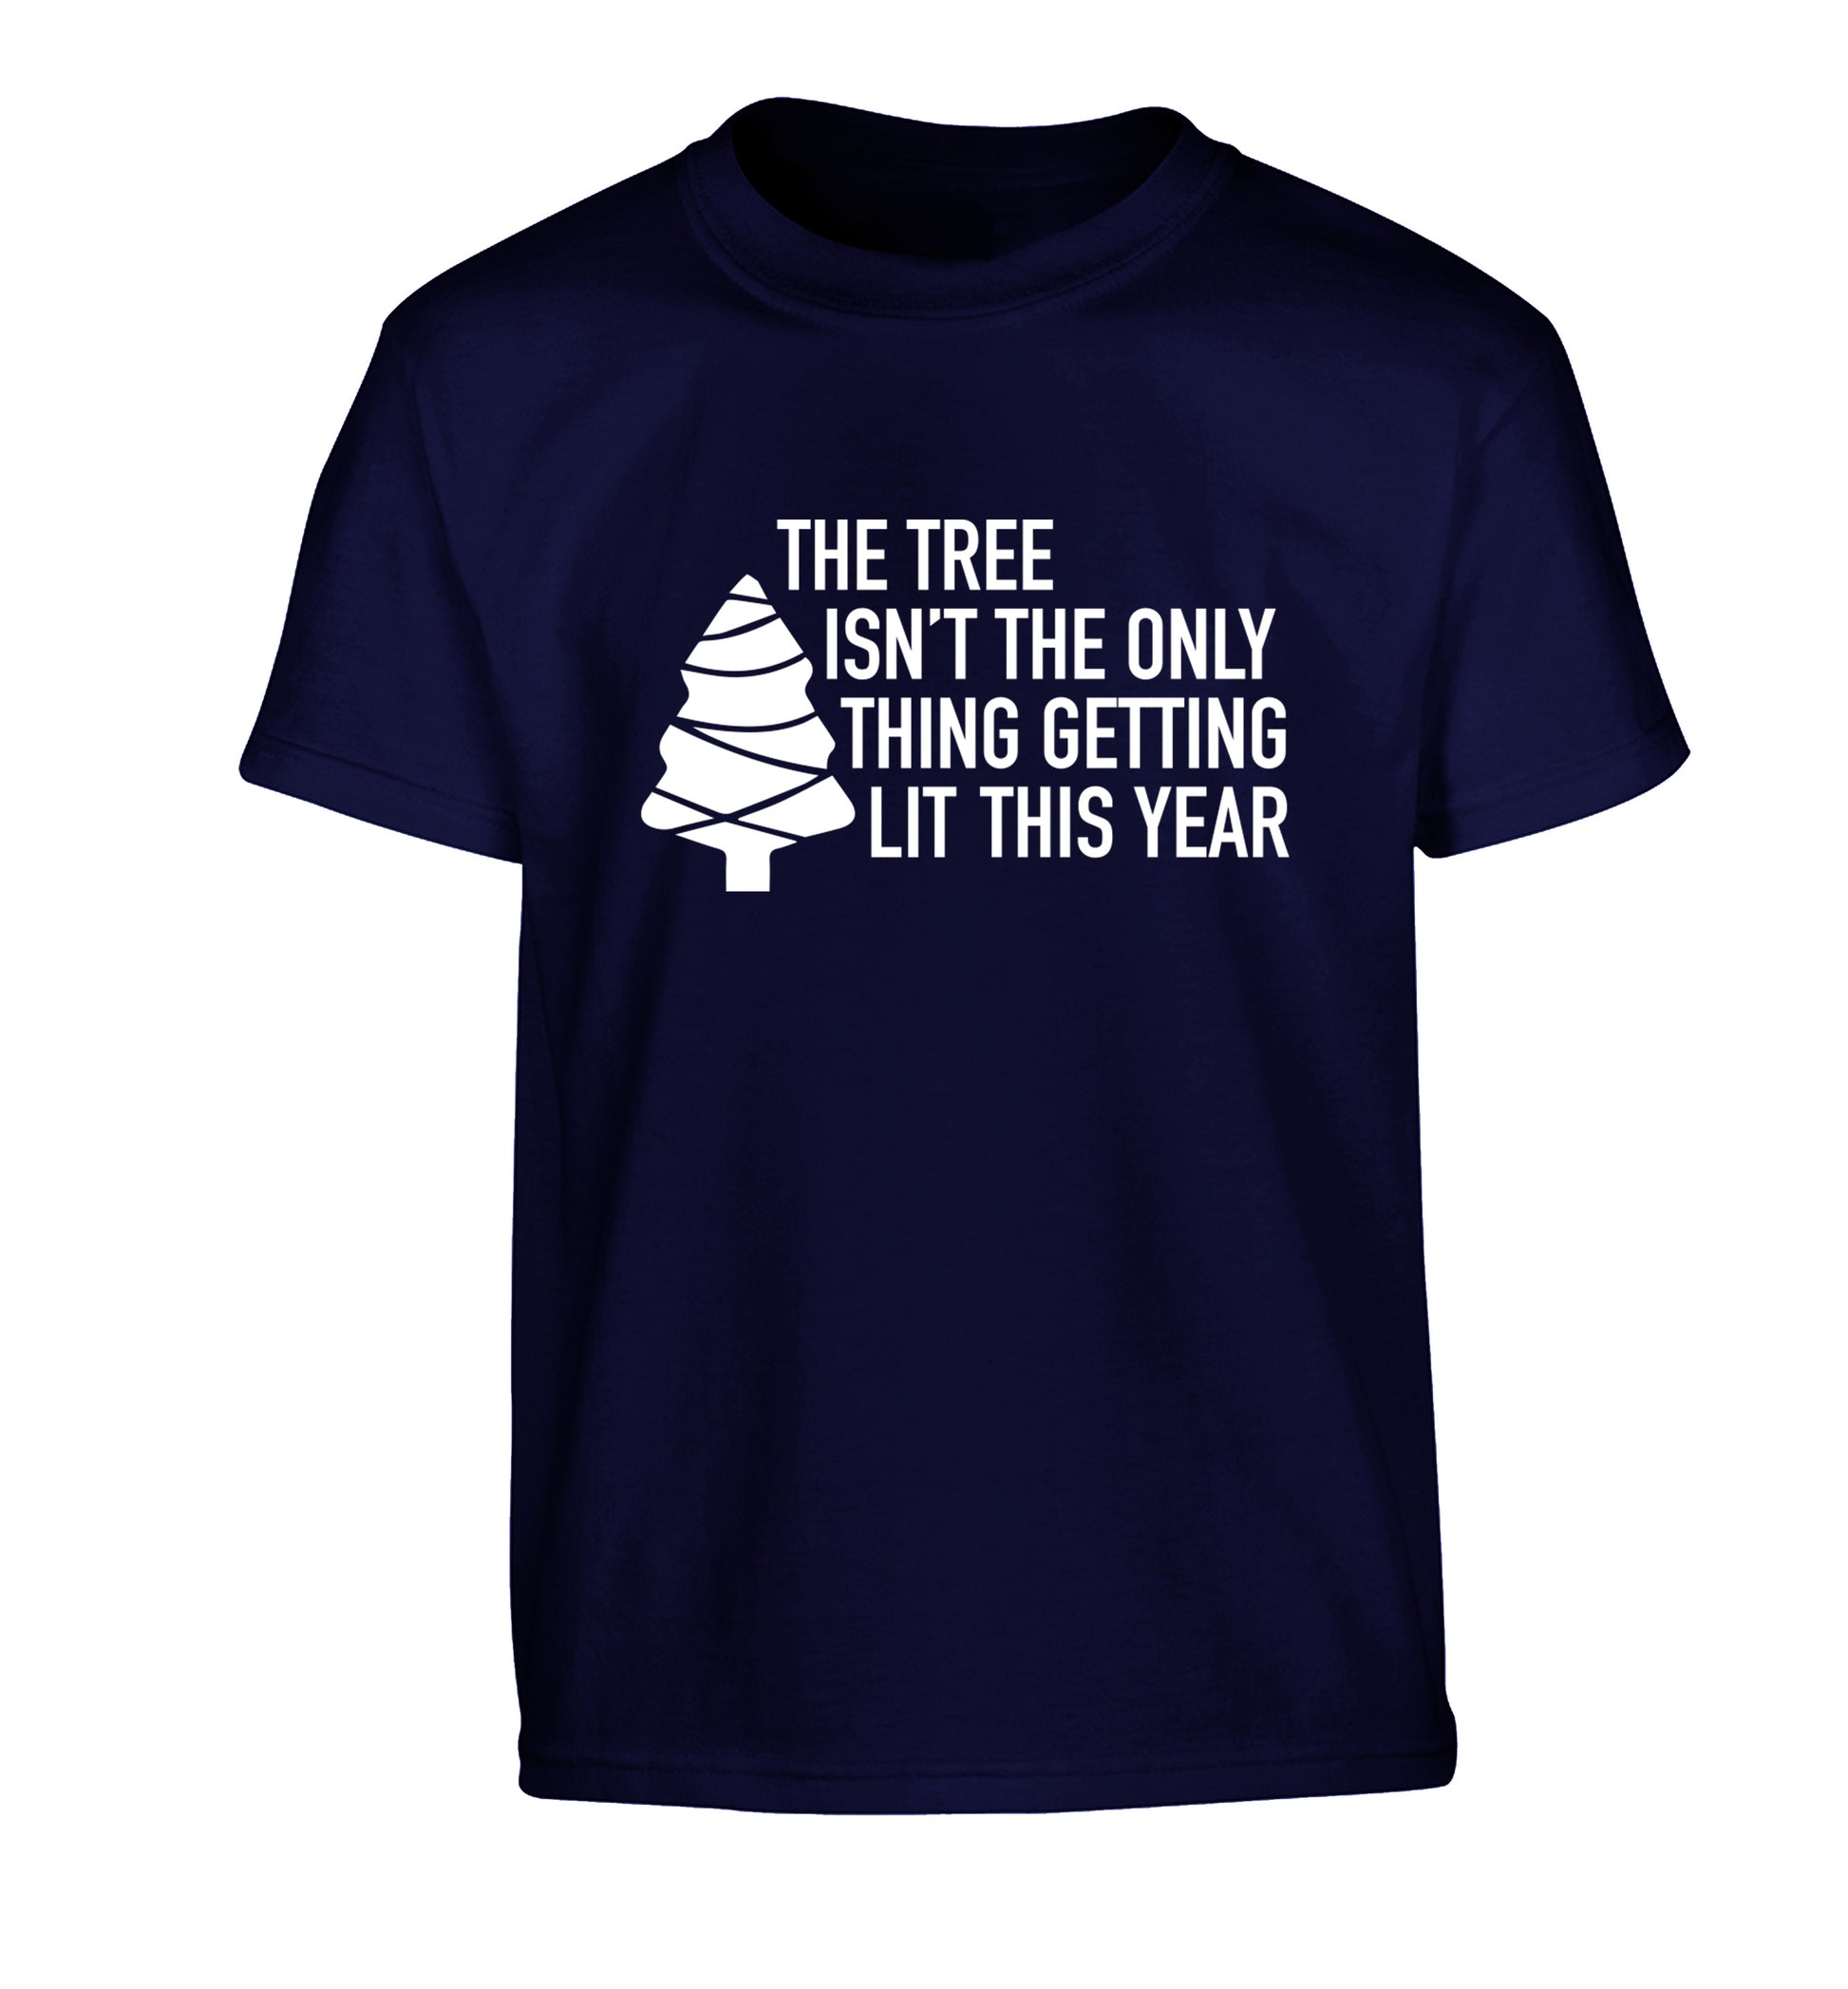 The tree isn't the only thing getting lit this year Children's navy Tshirt 12-14 Years